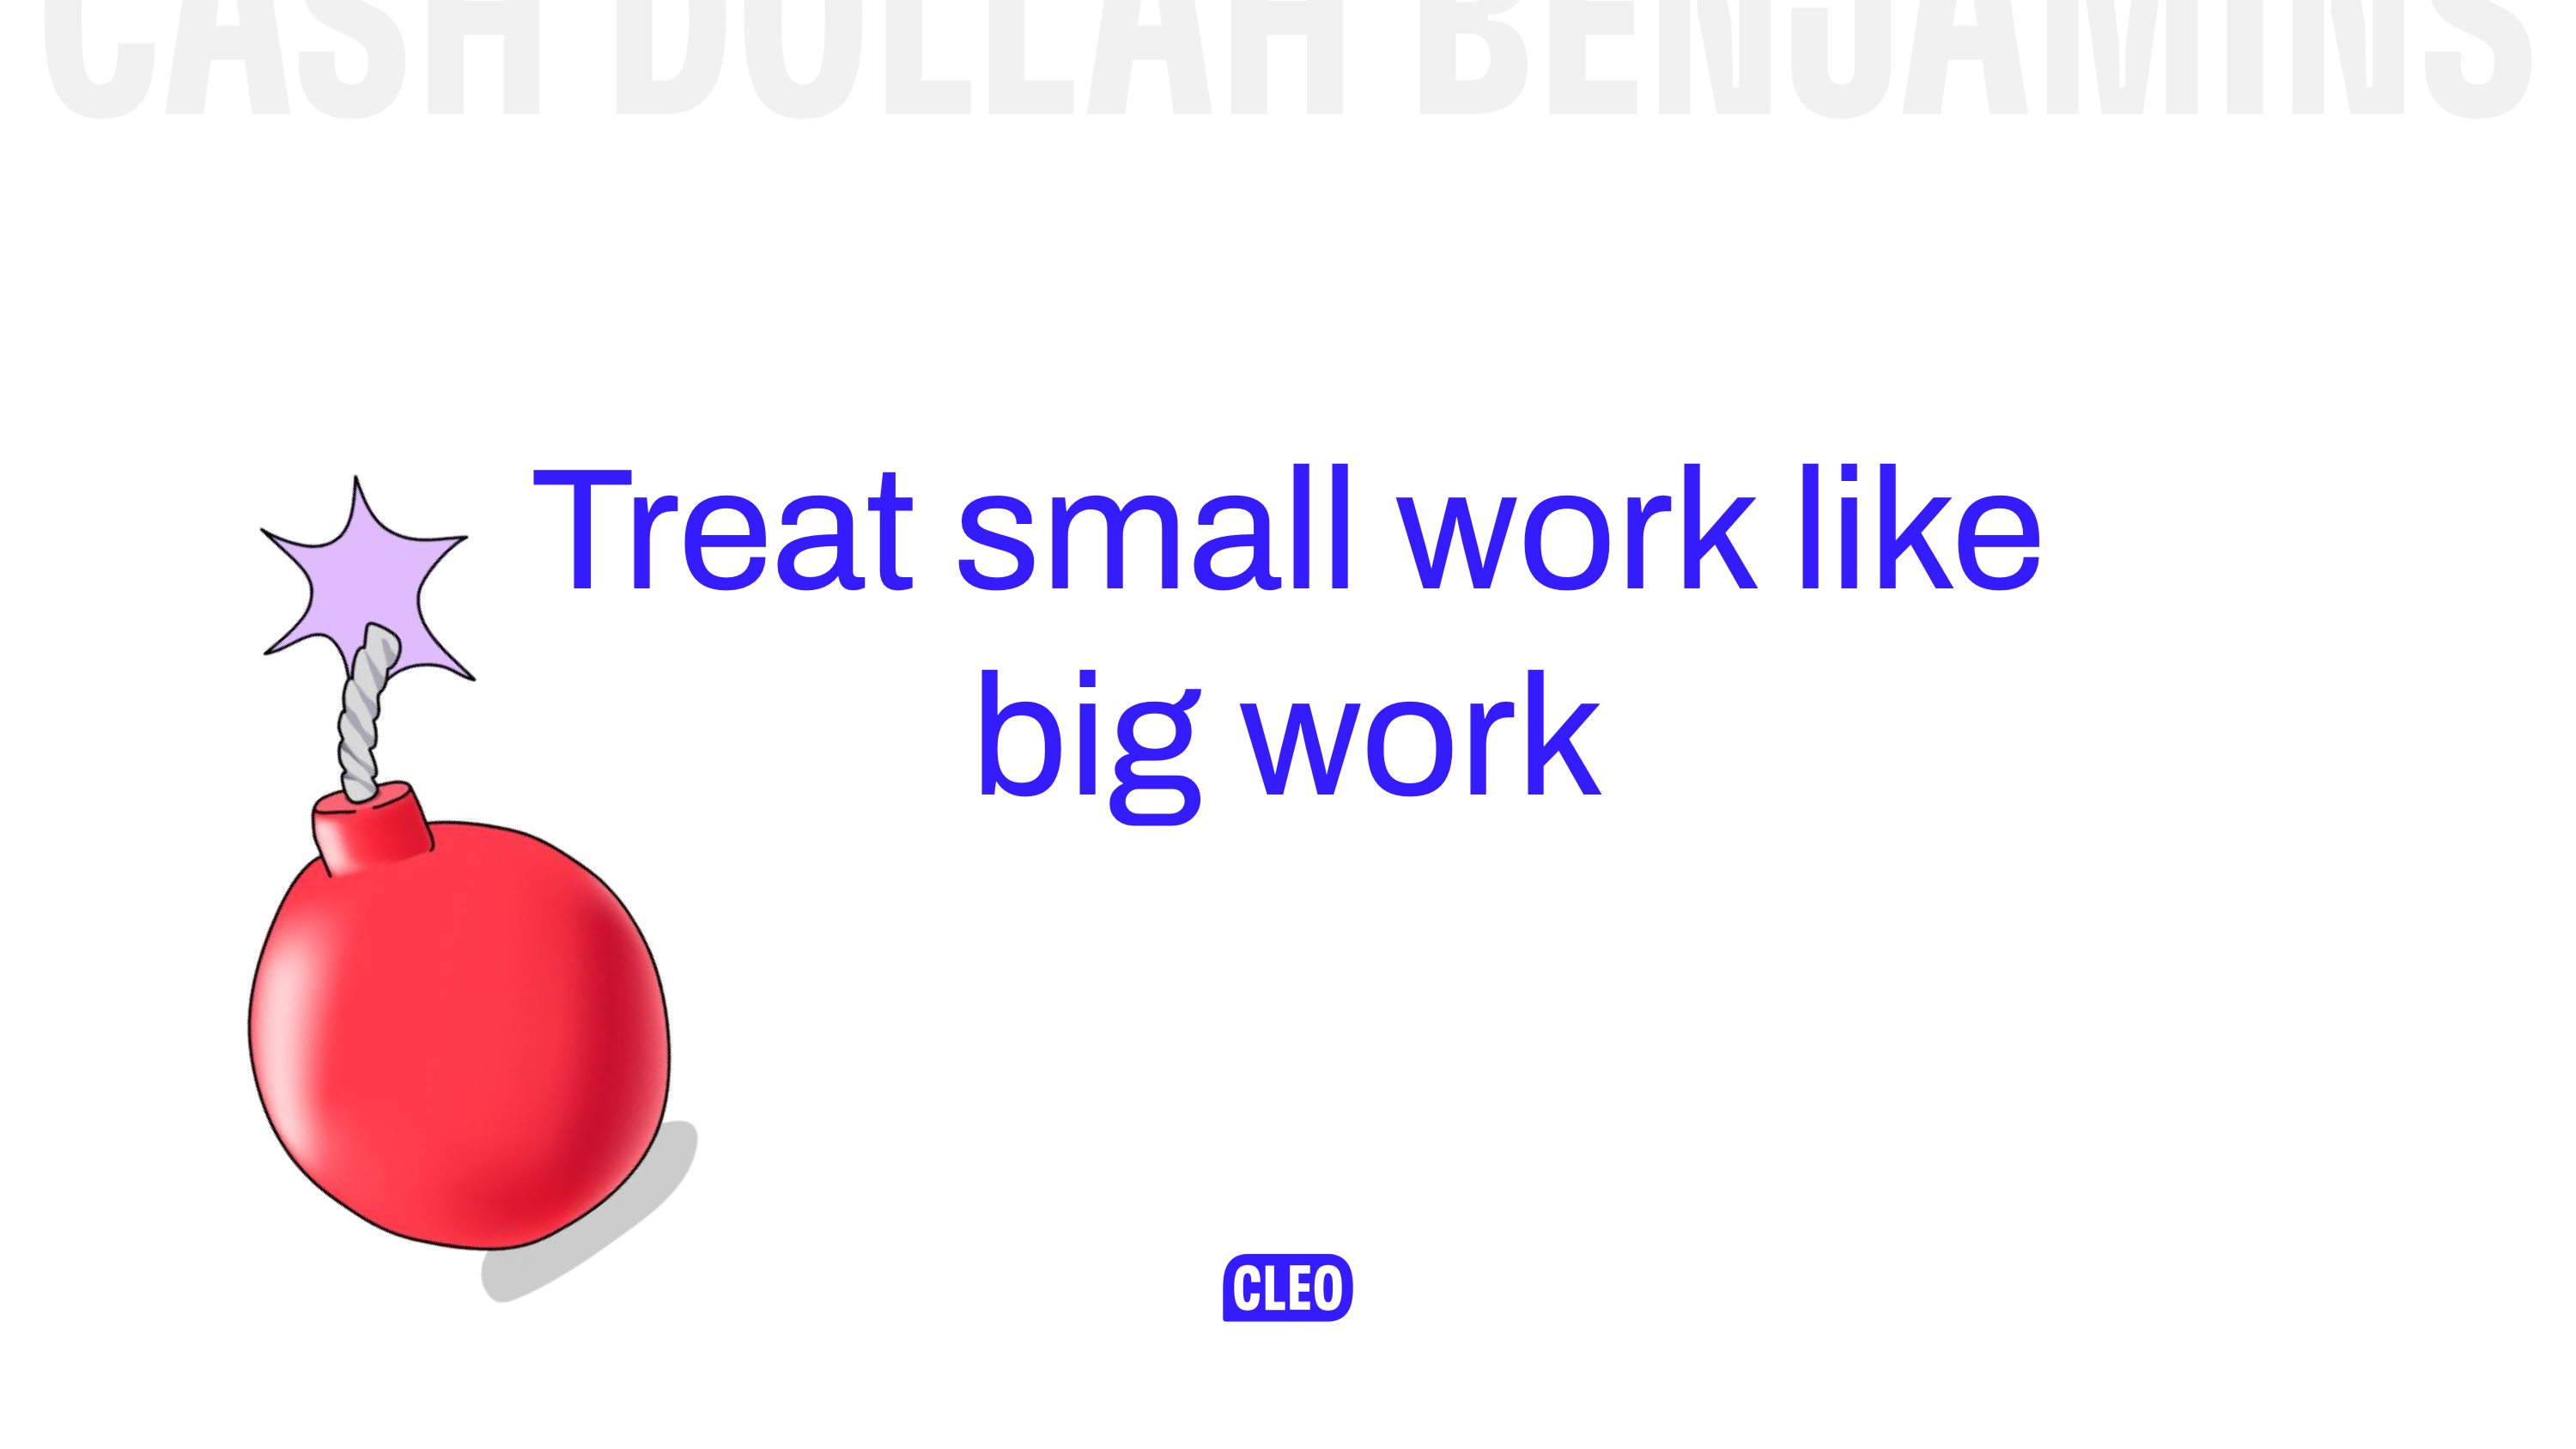 Treat small work like big work - to illustrate this, there is a big red bomb graphic; text: Treat small work like big work